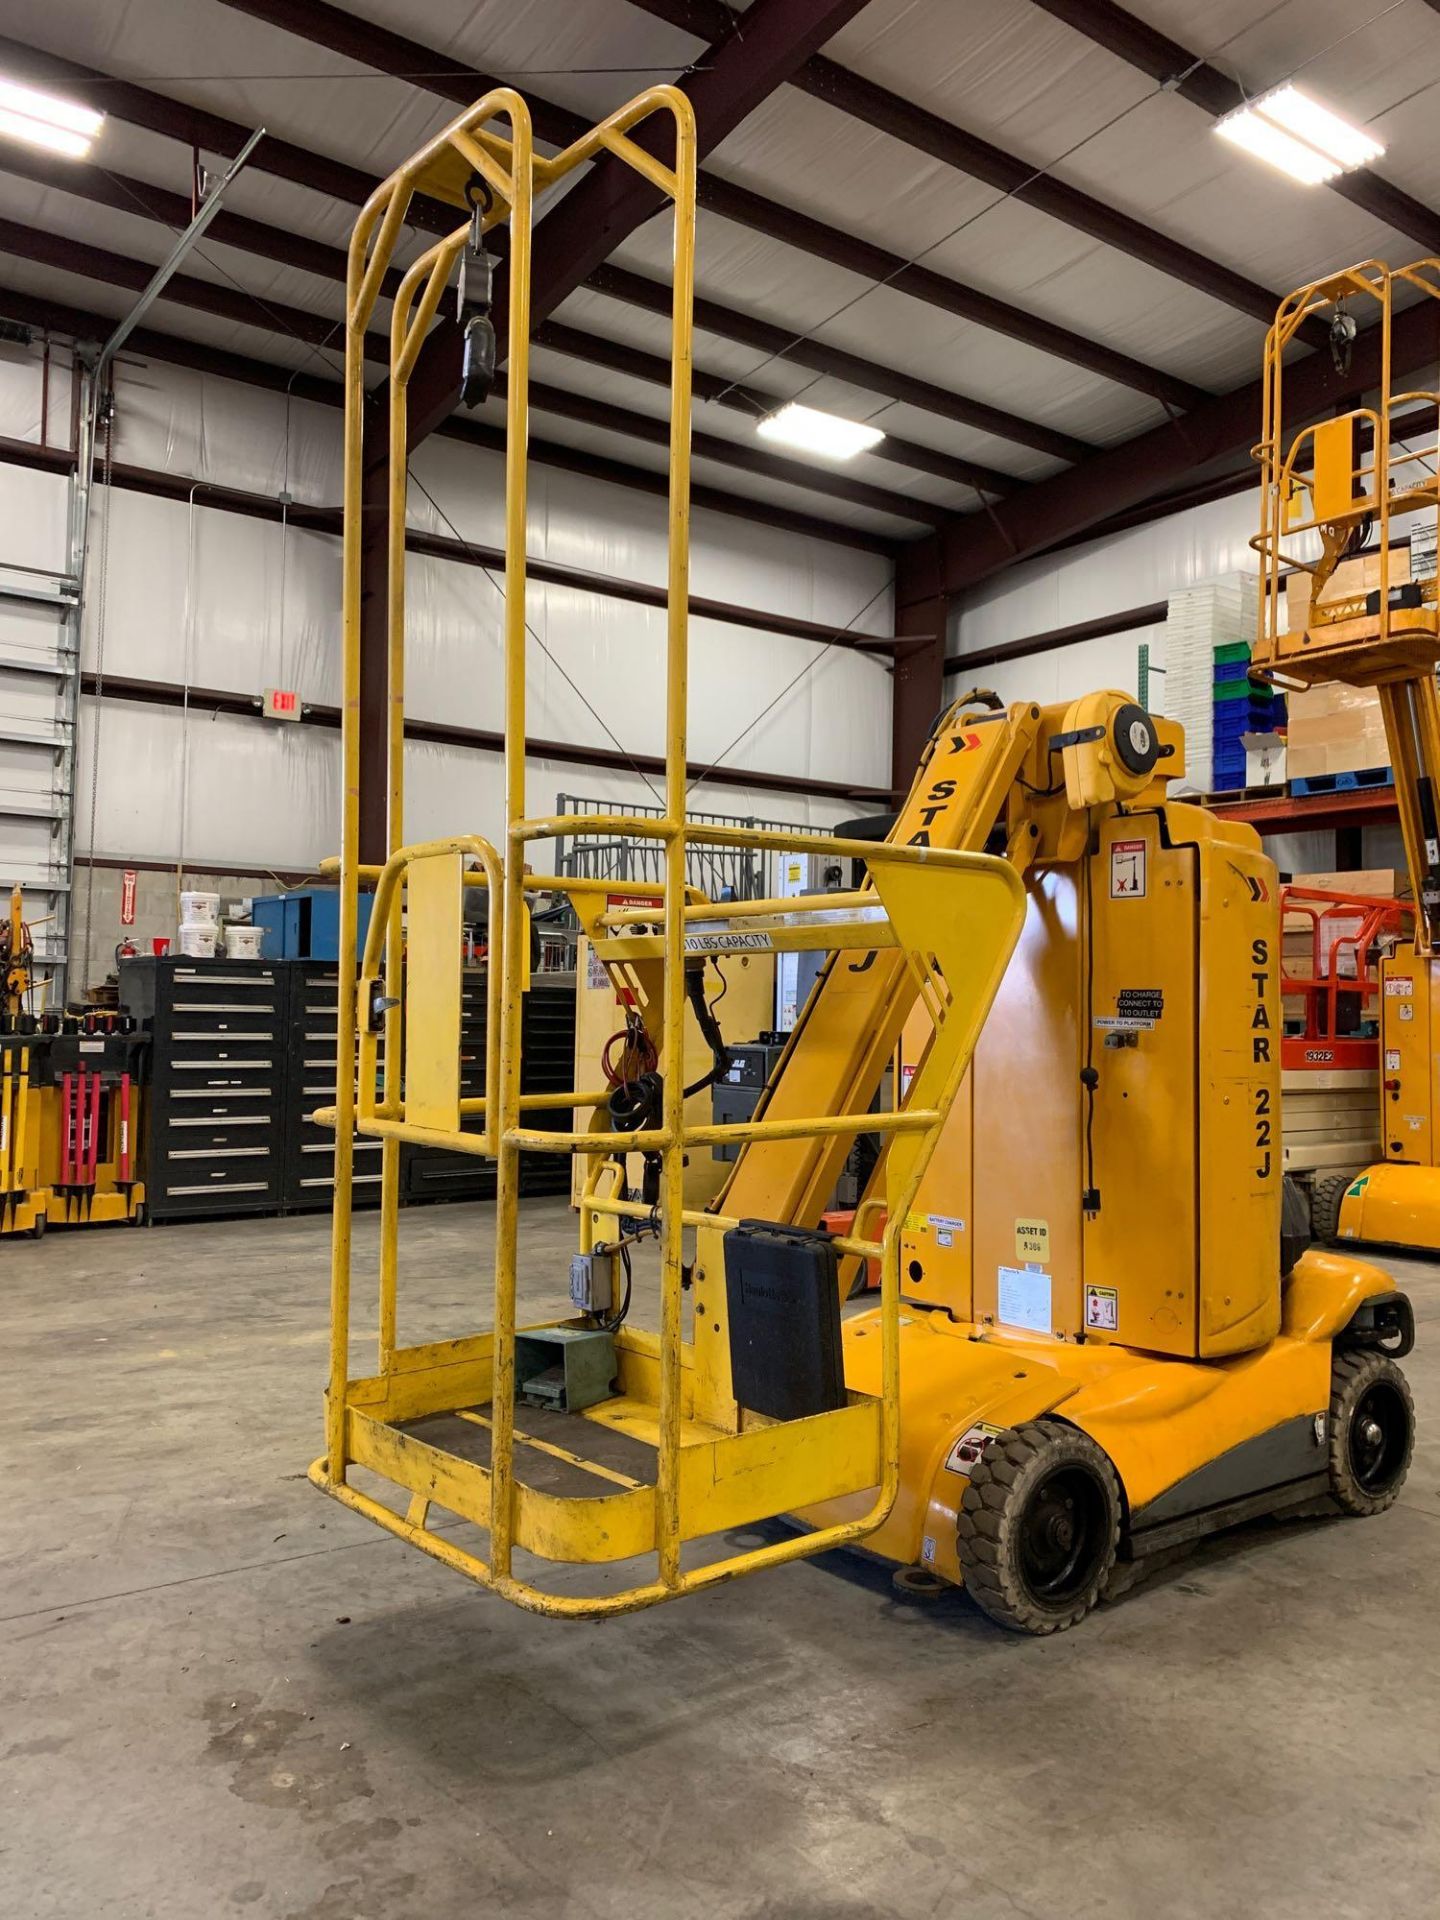 HOULOTTE STAR 22J ELECTRIC MAN LIFT, 22' HEIGHT CAPACITY